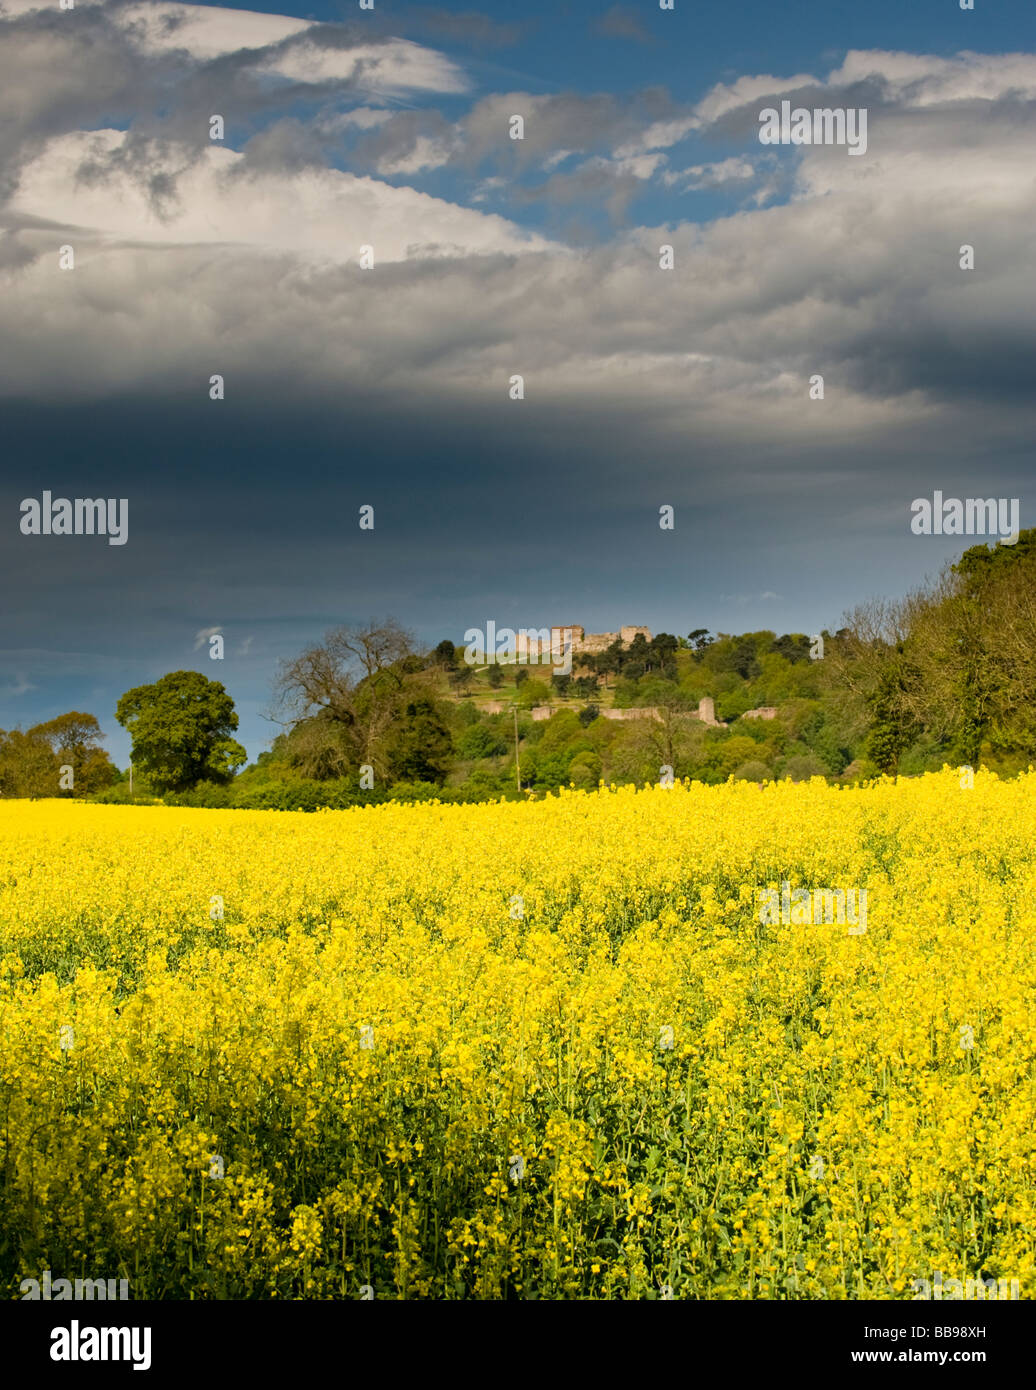 Stormy Sky Over Beeston Castle with Rapeseed Field in Forground, Beeston, Cheshire, England, UK Stock Photo